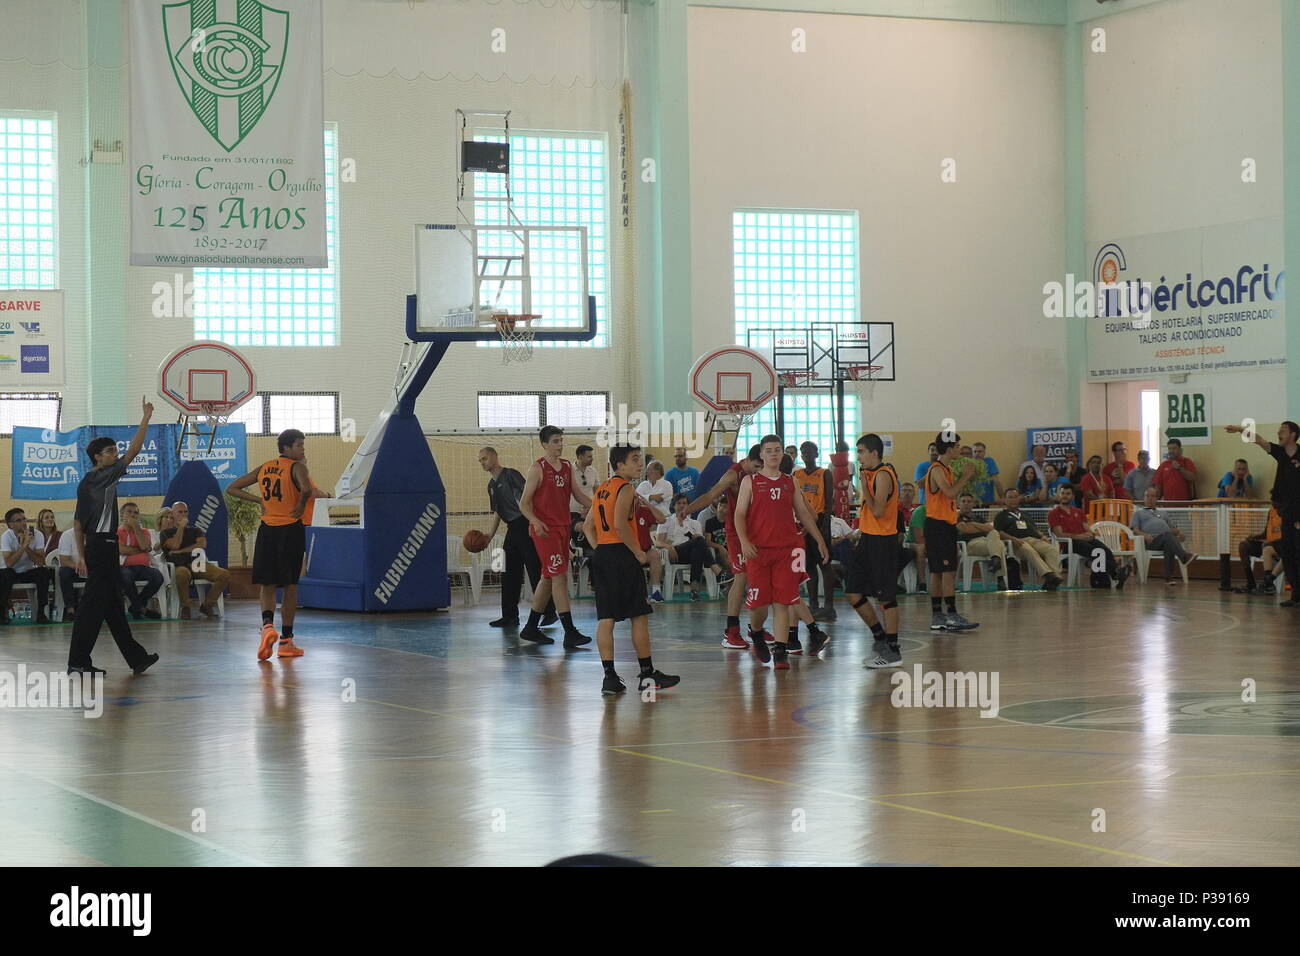 Algarve, Portugal. 17th June, 2018. Portuguese Basketball sub-14 championship final, also called Final 6. Basketball team Imortal from Albufeira defeated BCQ from Queluz 57-50 in Olhao. Credit: Angelo DeVal/Alamy Live News Stock Photo